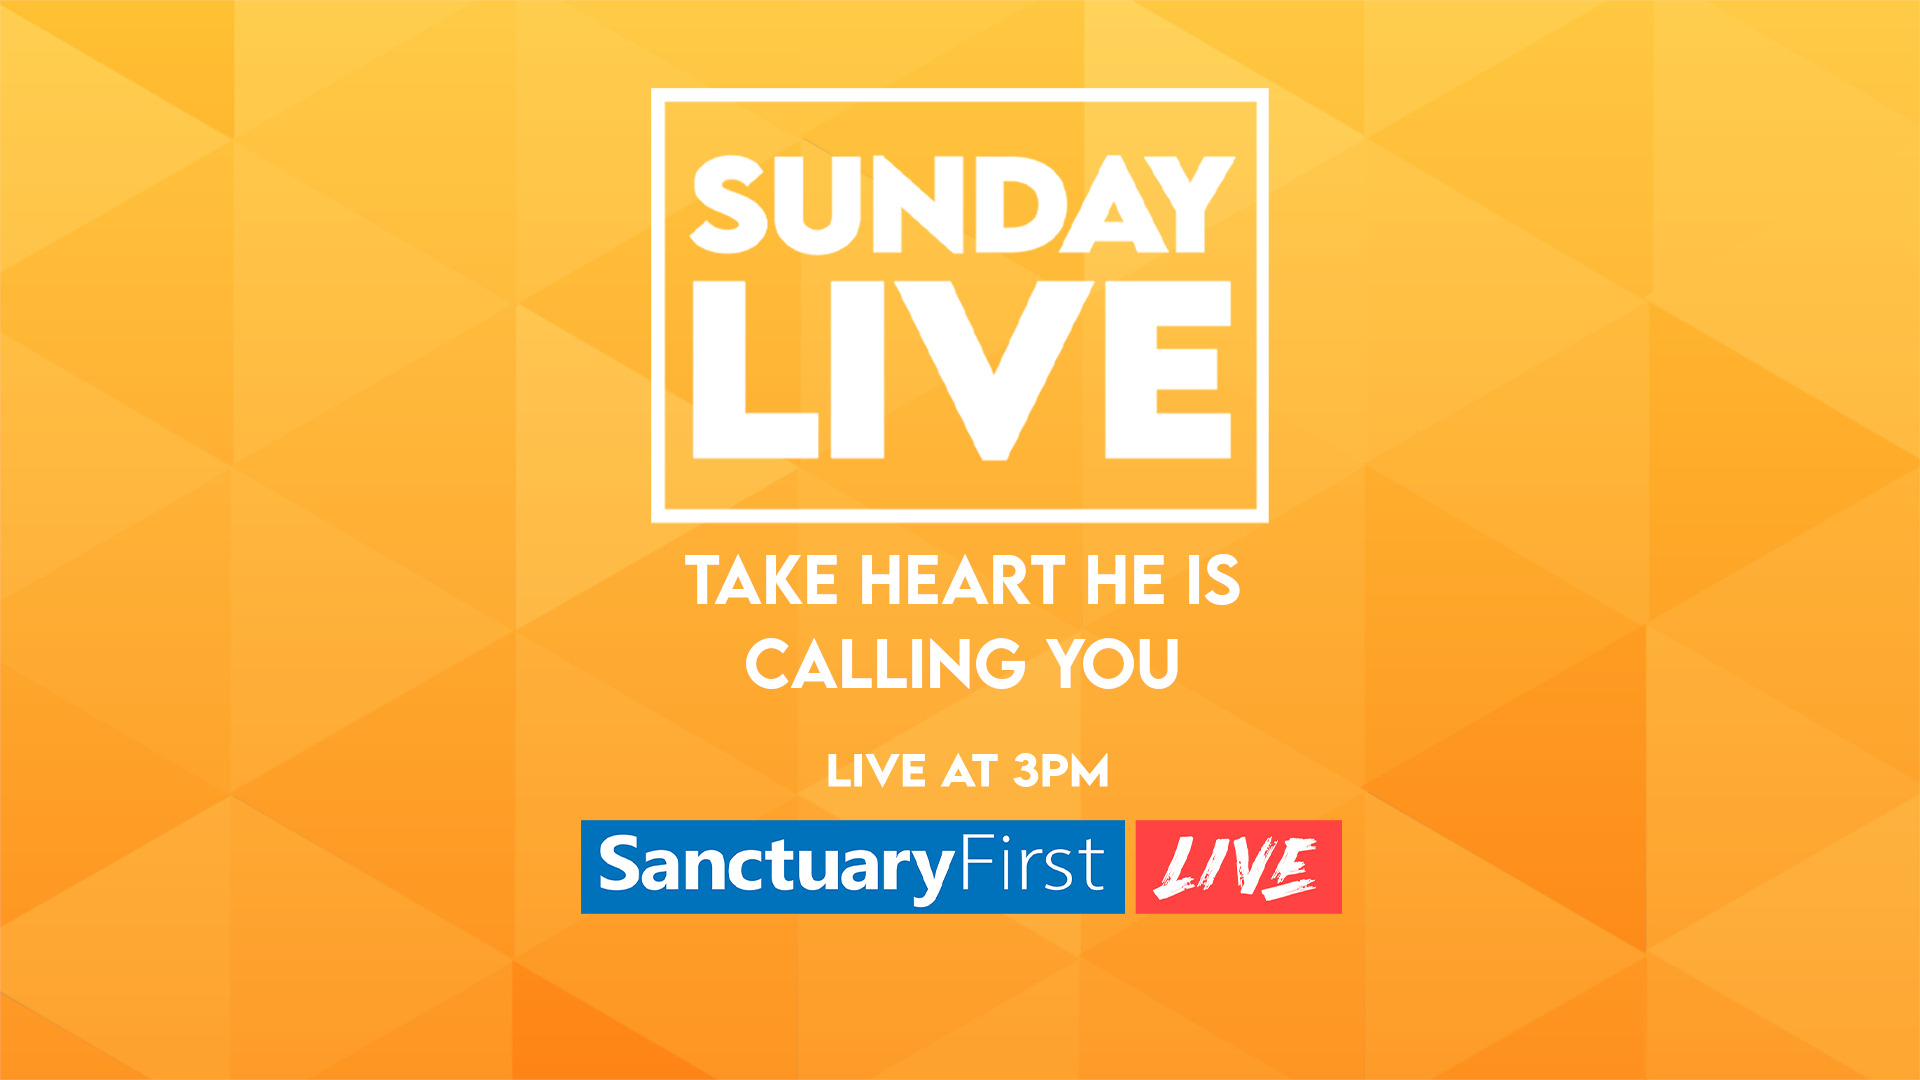 Sunday Live - Take Heart He Is Calling You